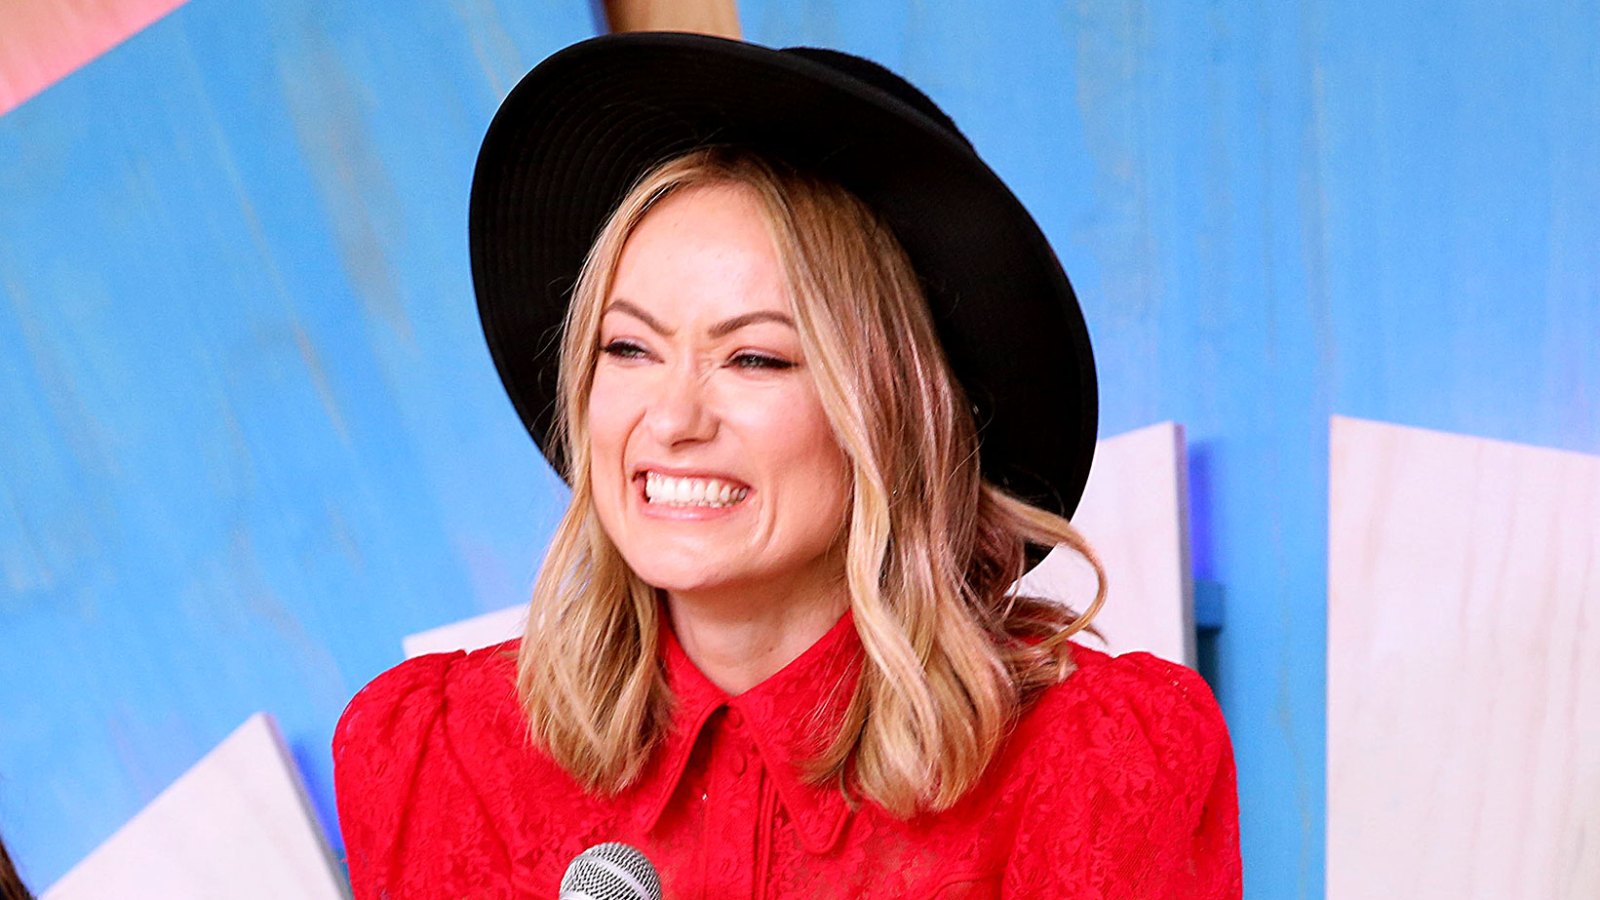 The Outrageously Cool Trick Olivia Wilde's Makeup Artist Used To Prep Her